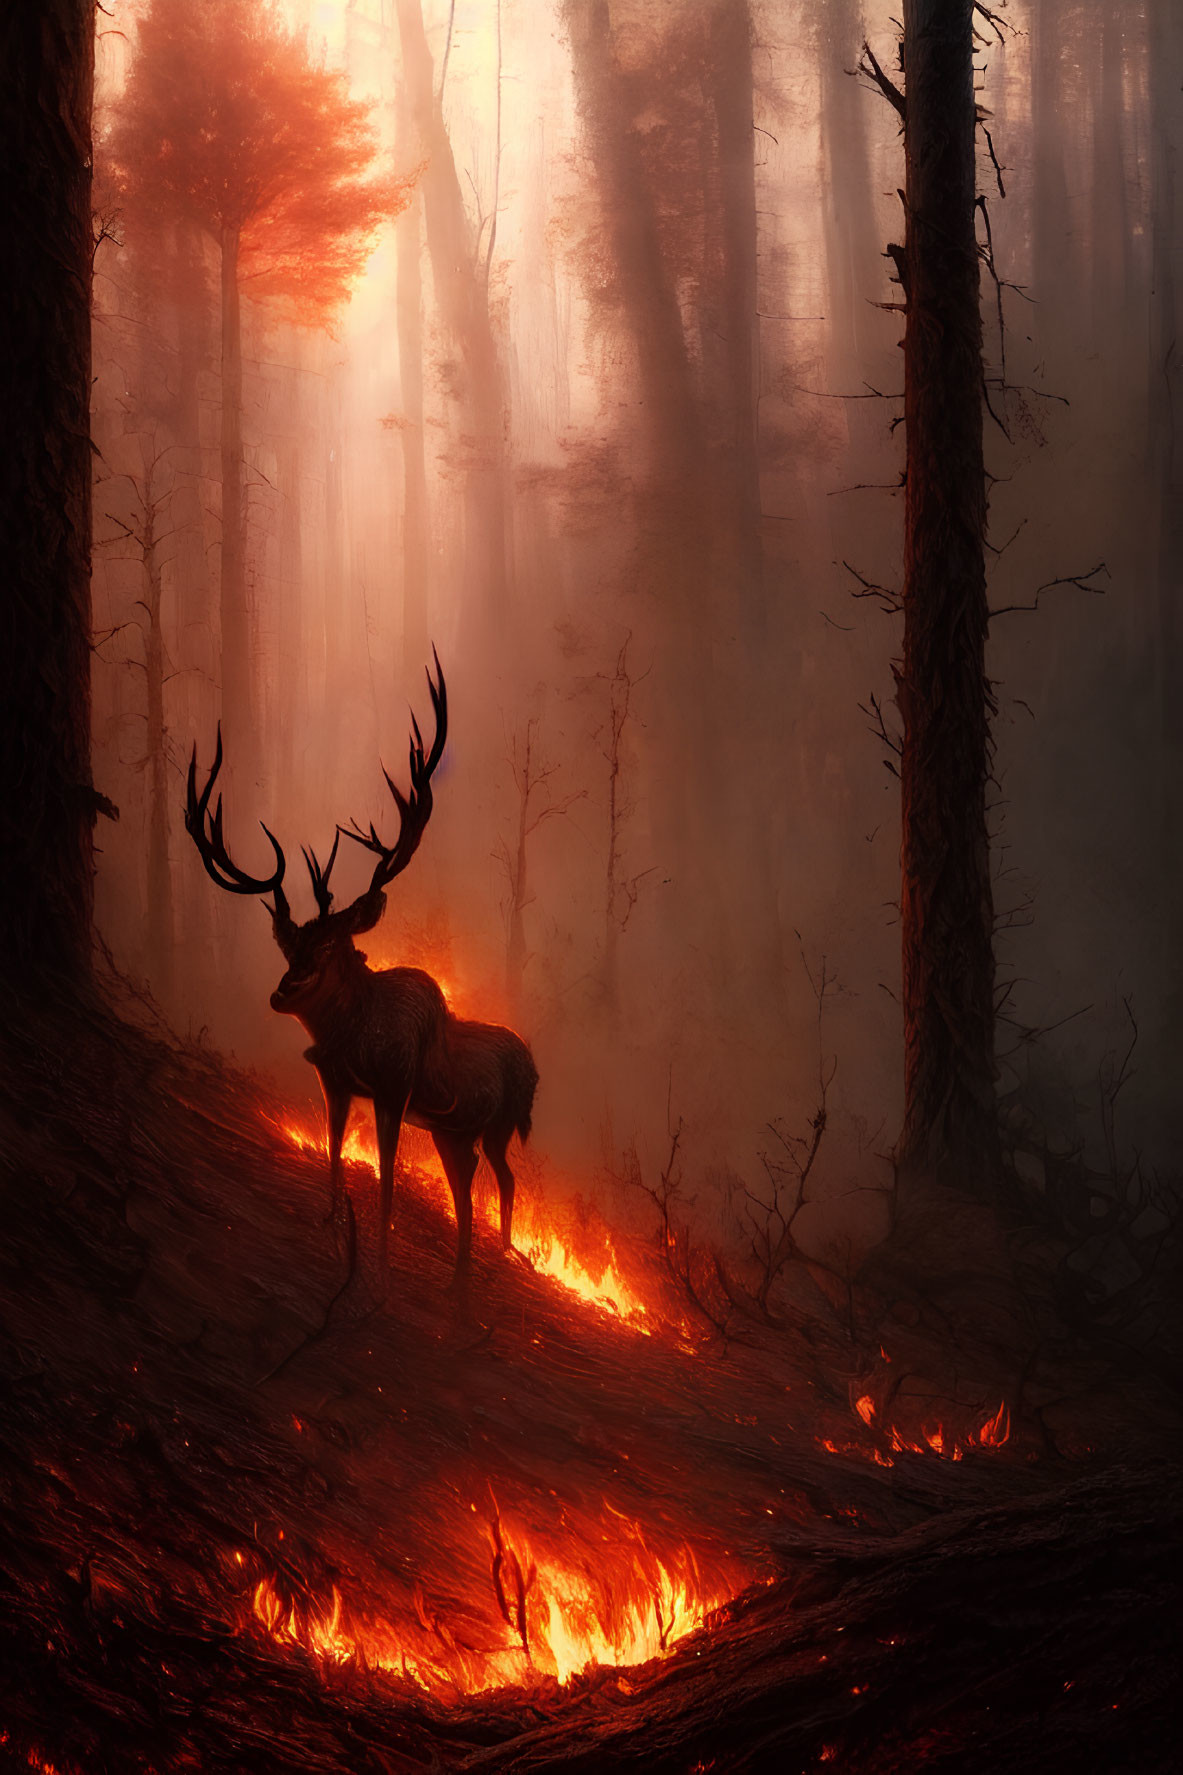 Majestic elk in misty forest with ground fire glow